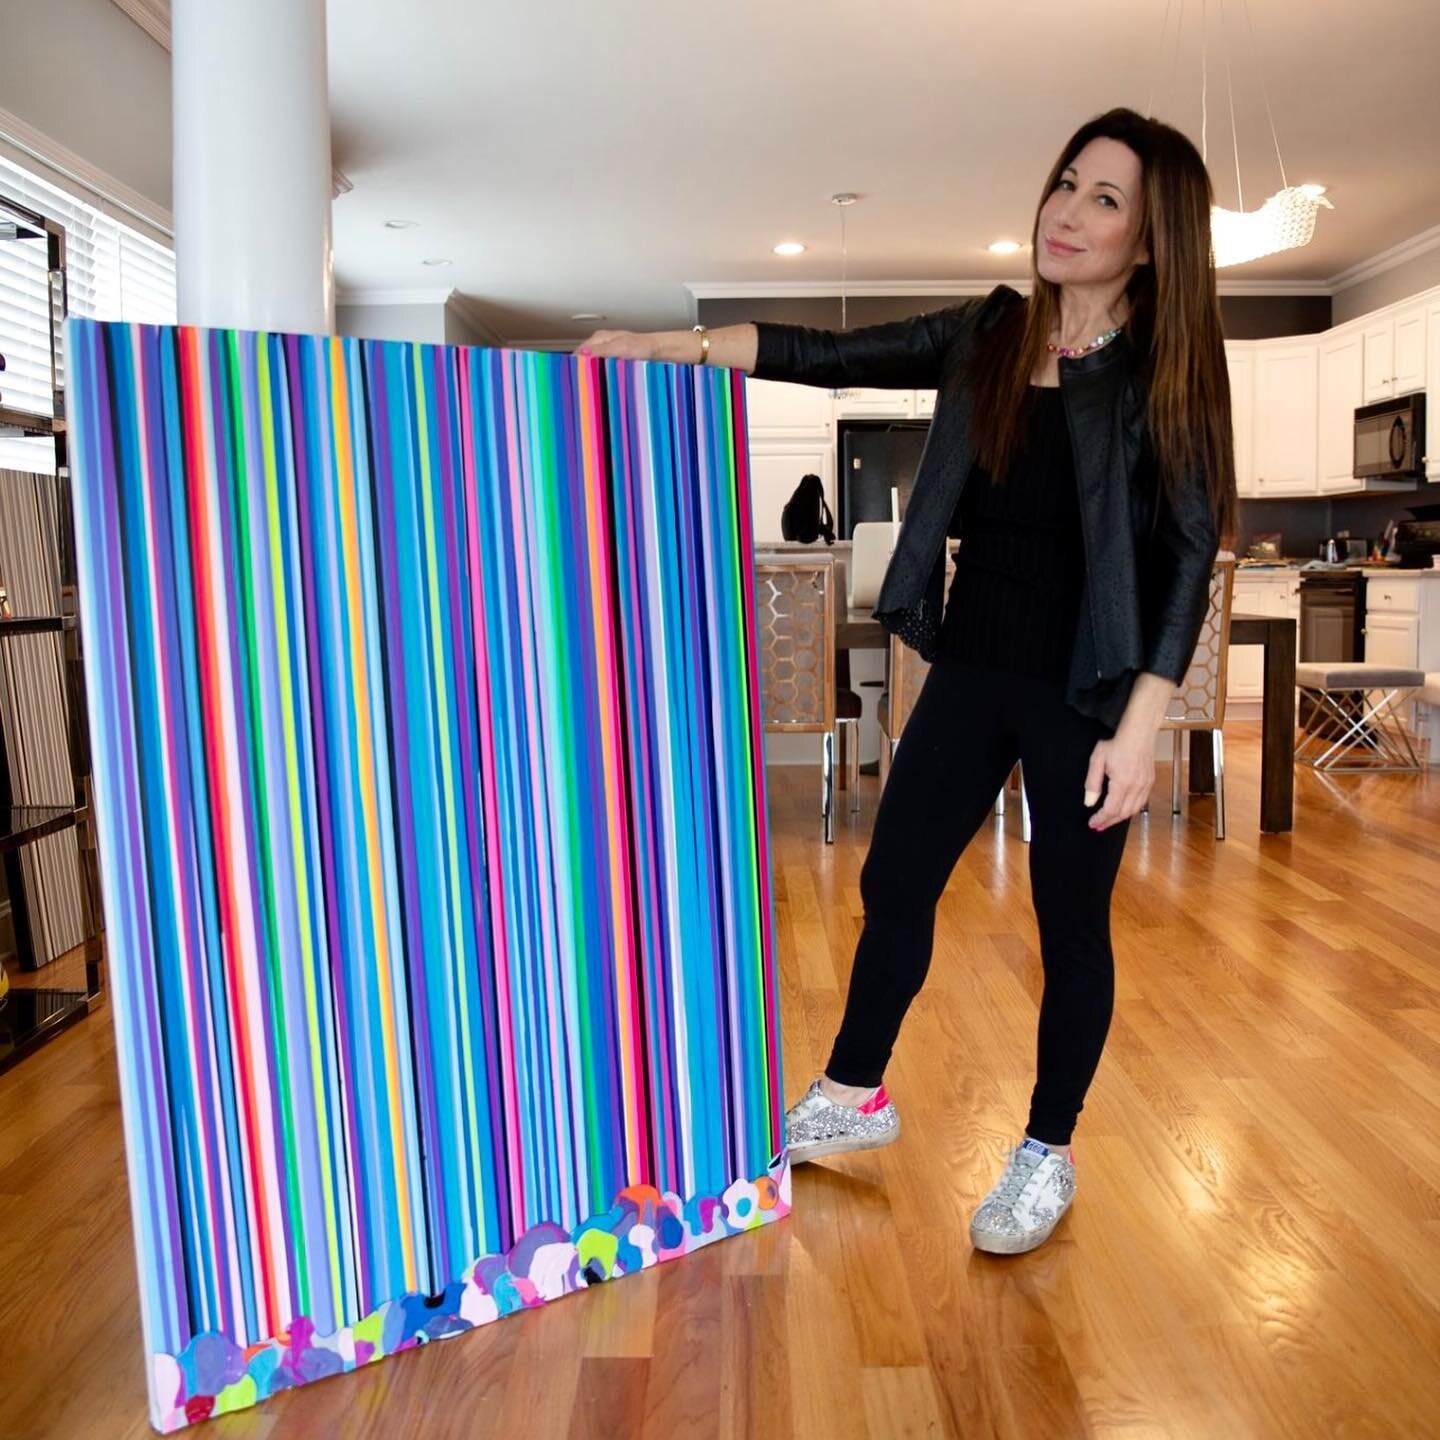 It&rsquo;s called Glorious Day 🌸! 48x36 in and ready to ship! Linked in todays story:)
.
.
.
#artwork #paintingoftheday #contrmporarypainting #modernart #modernartists #moderngallery #contemporaryart #contemporarystyle